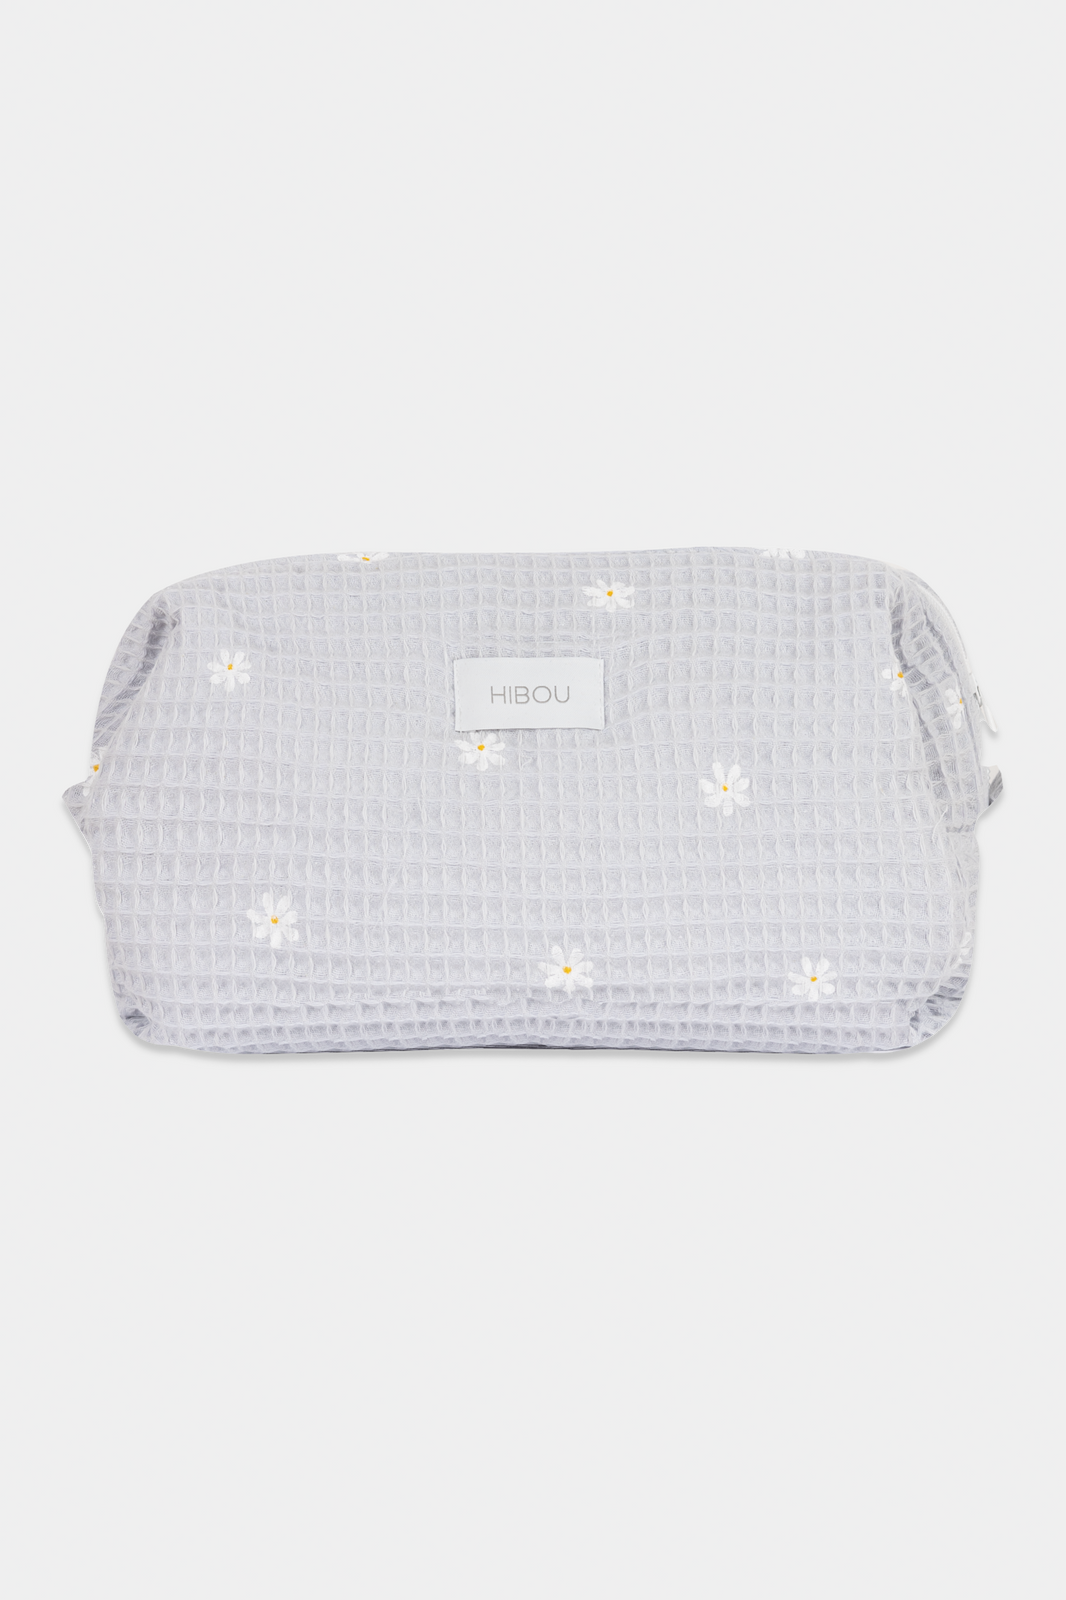 Large Waffle Weave Toiletry Bag in Light Grey 